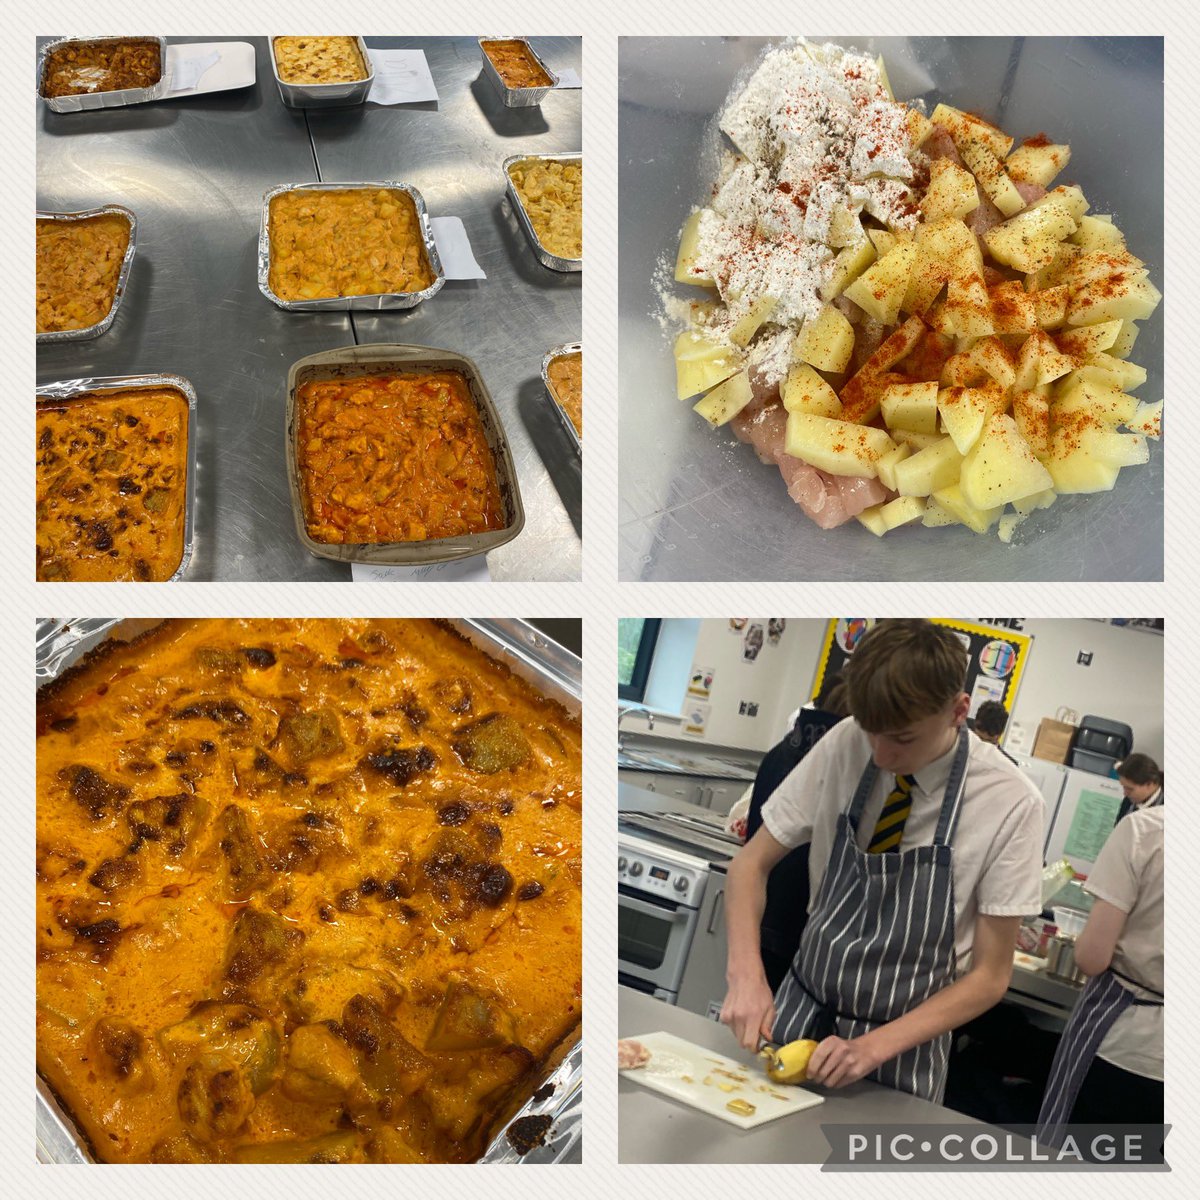 Today 10B GCSE students made paprika chicken. Peeling, chopping, mixing, measuring, temperature control, monitoring, trying new ingredients and becoming #healthyconfidentindividuals. Starting to master the cleaning! All in one hour! #lifeskills #learningforlife very proud! 😊